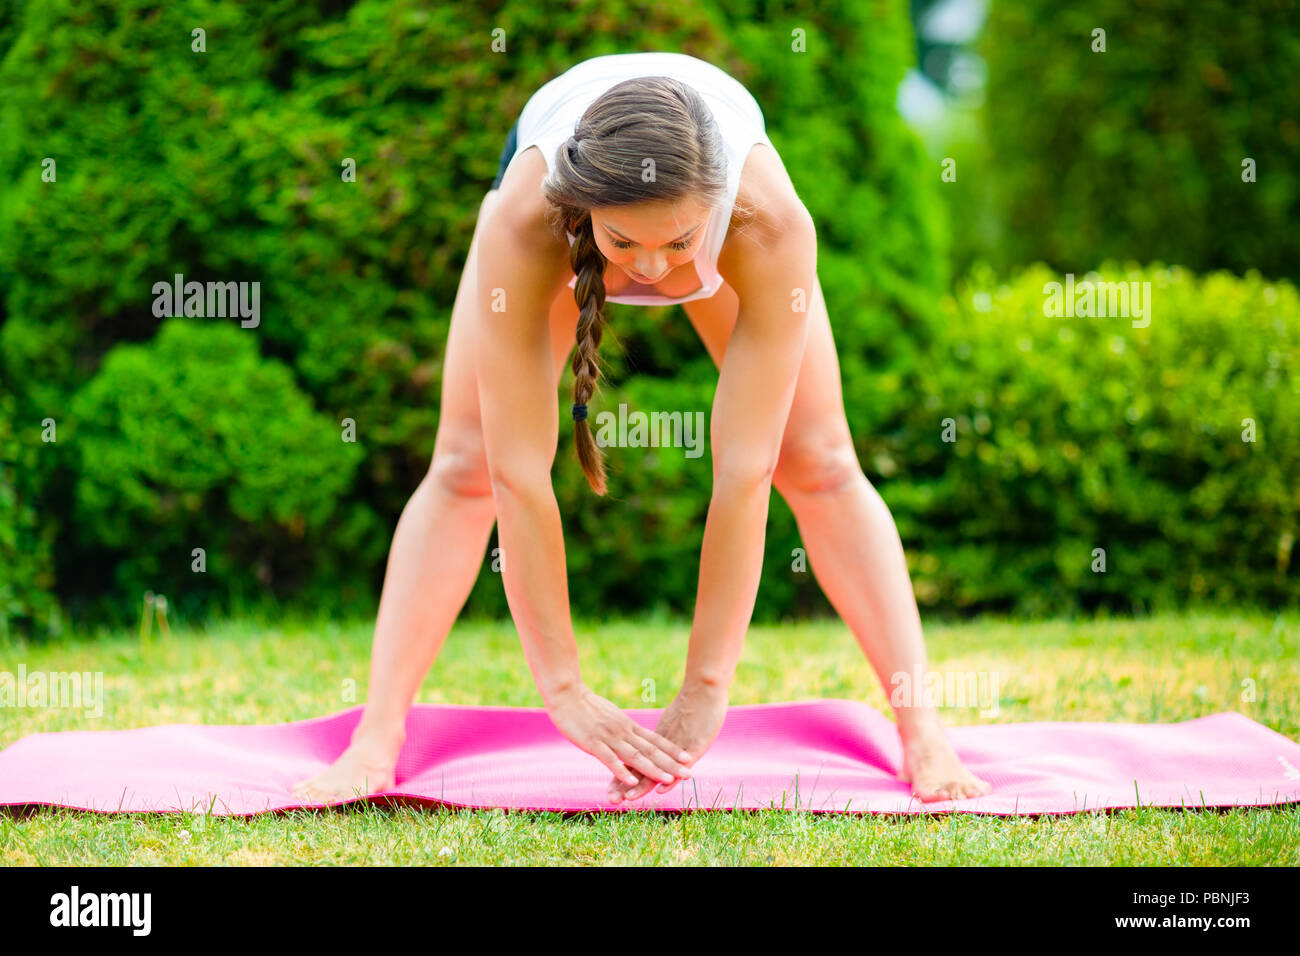 Woman doing yoga in park stock photo